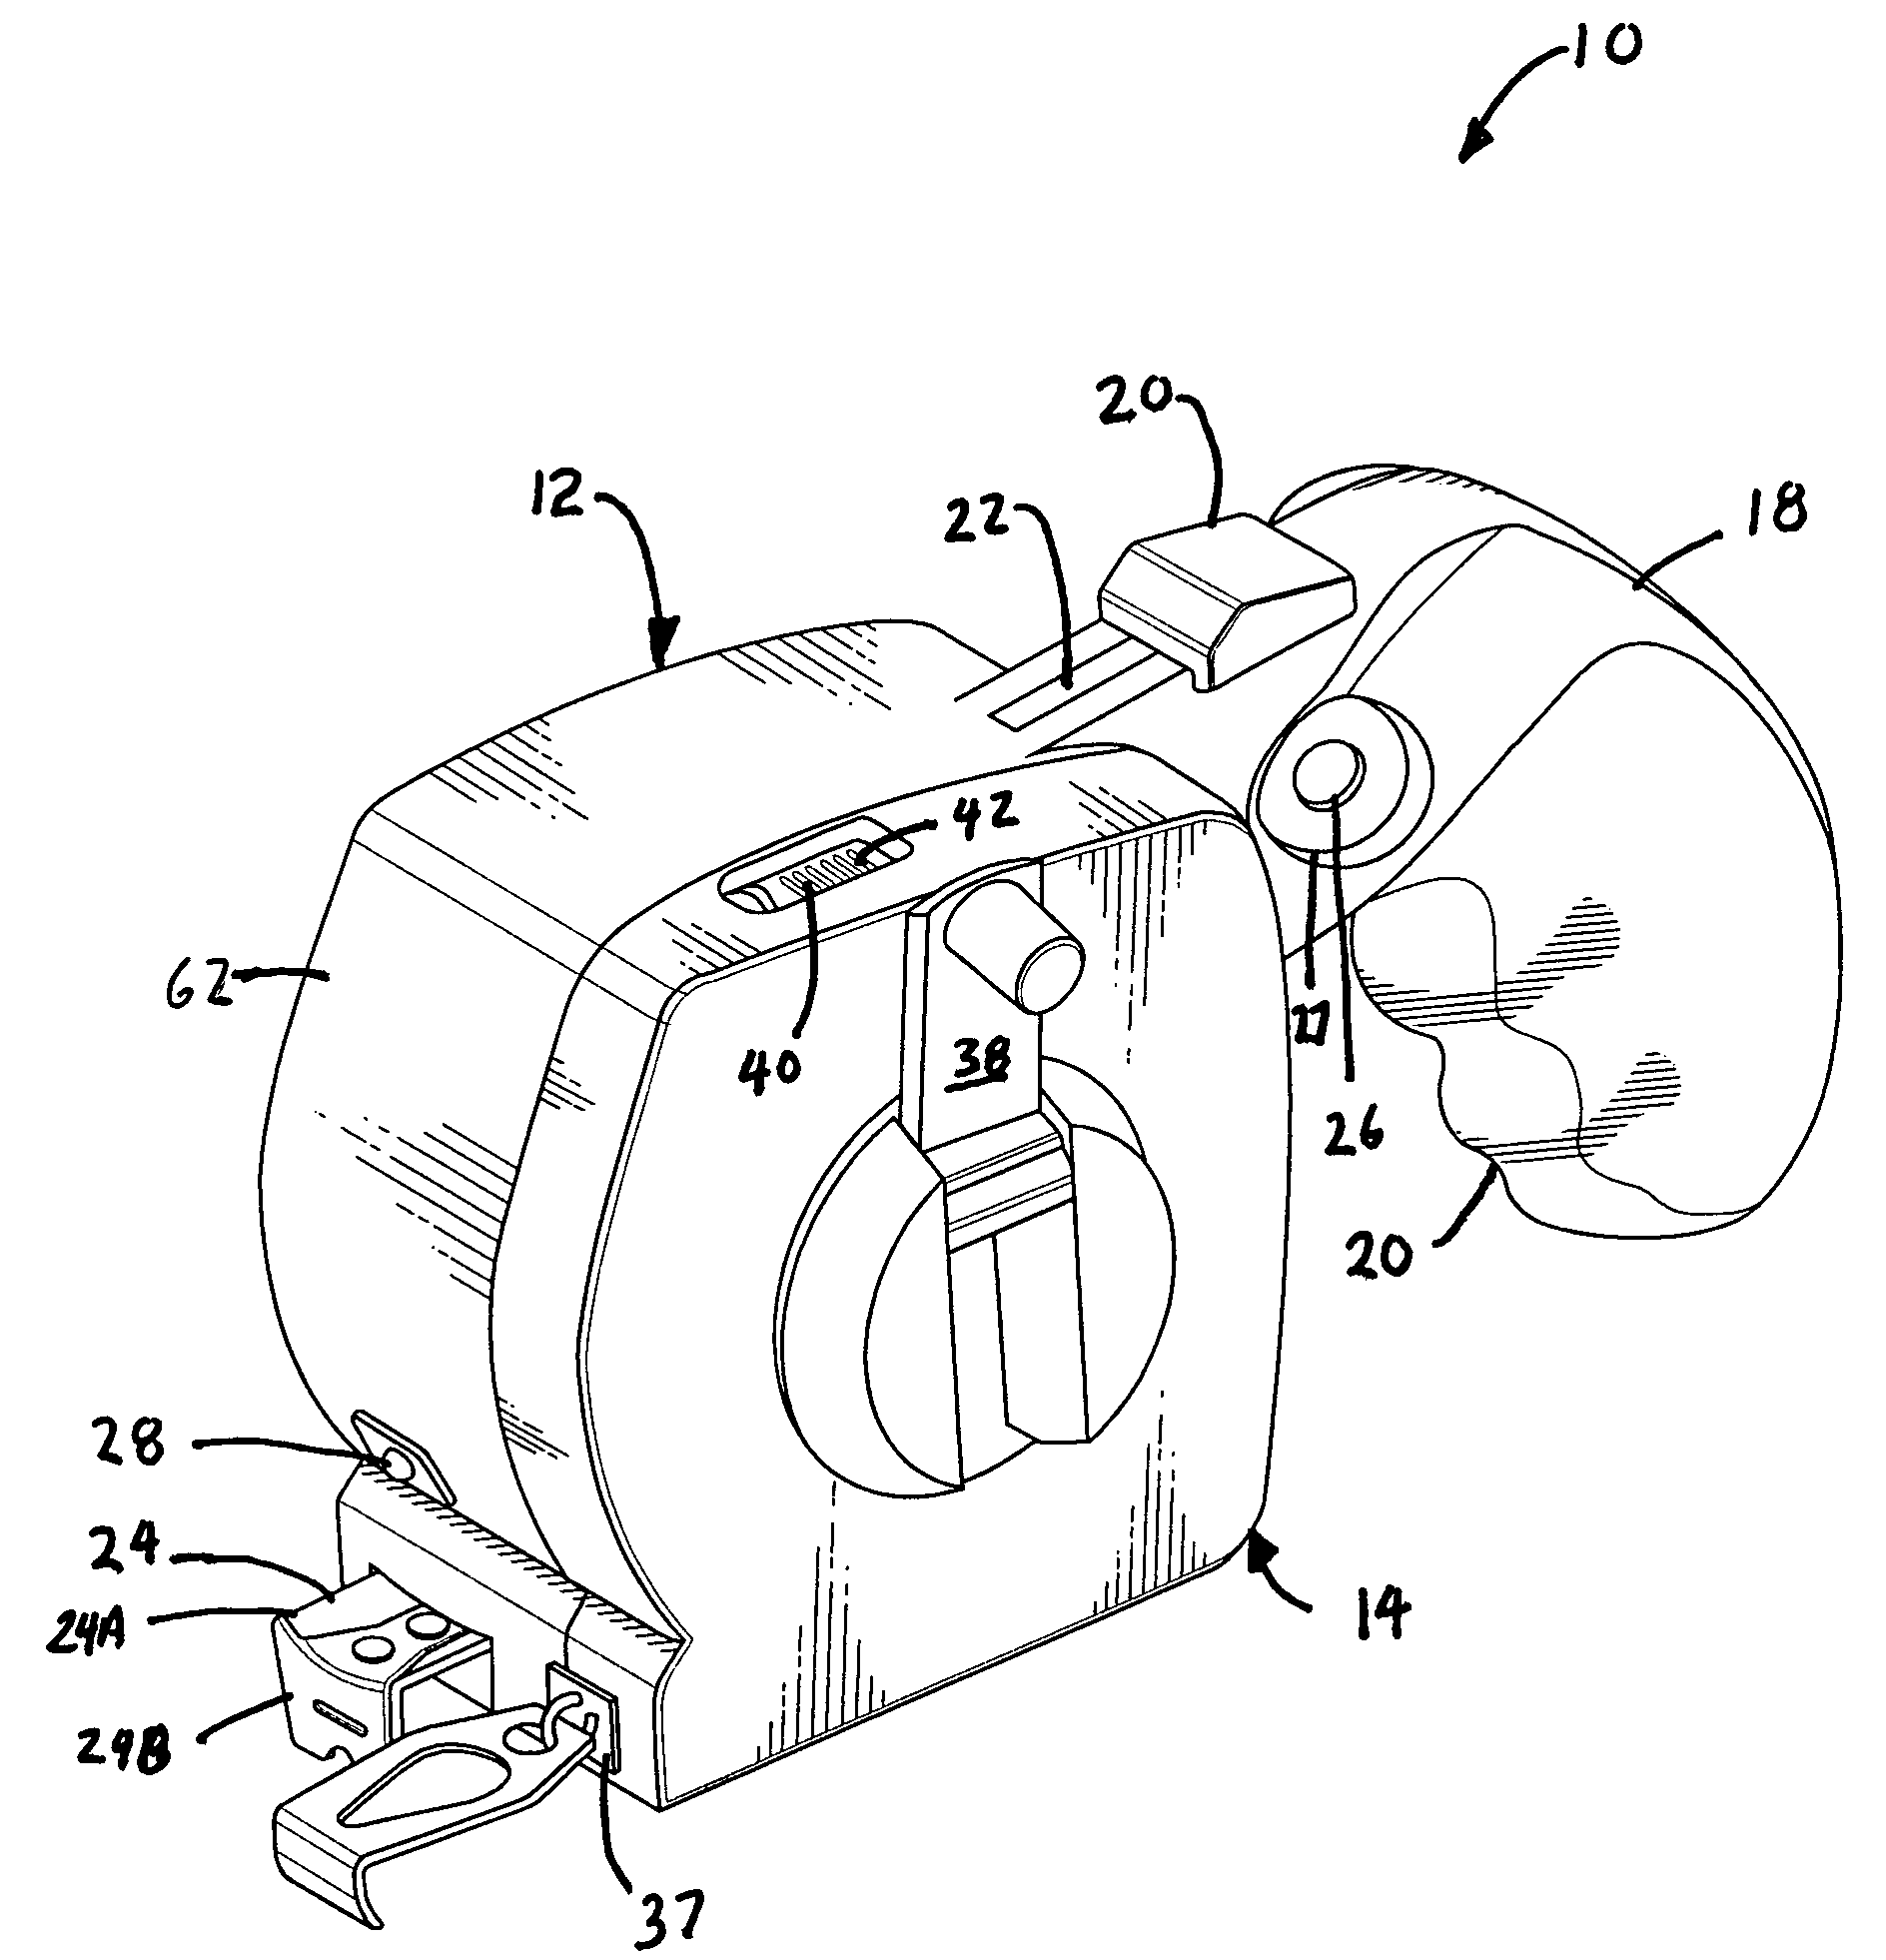 Tape measure having a handle and a removable chalk line marker and method therefor